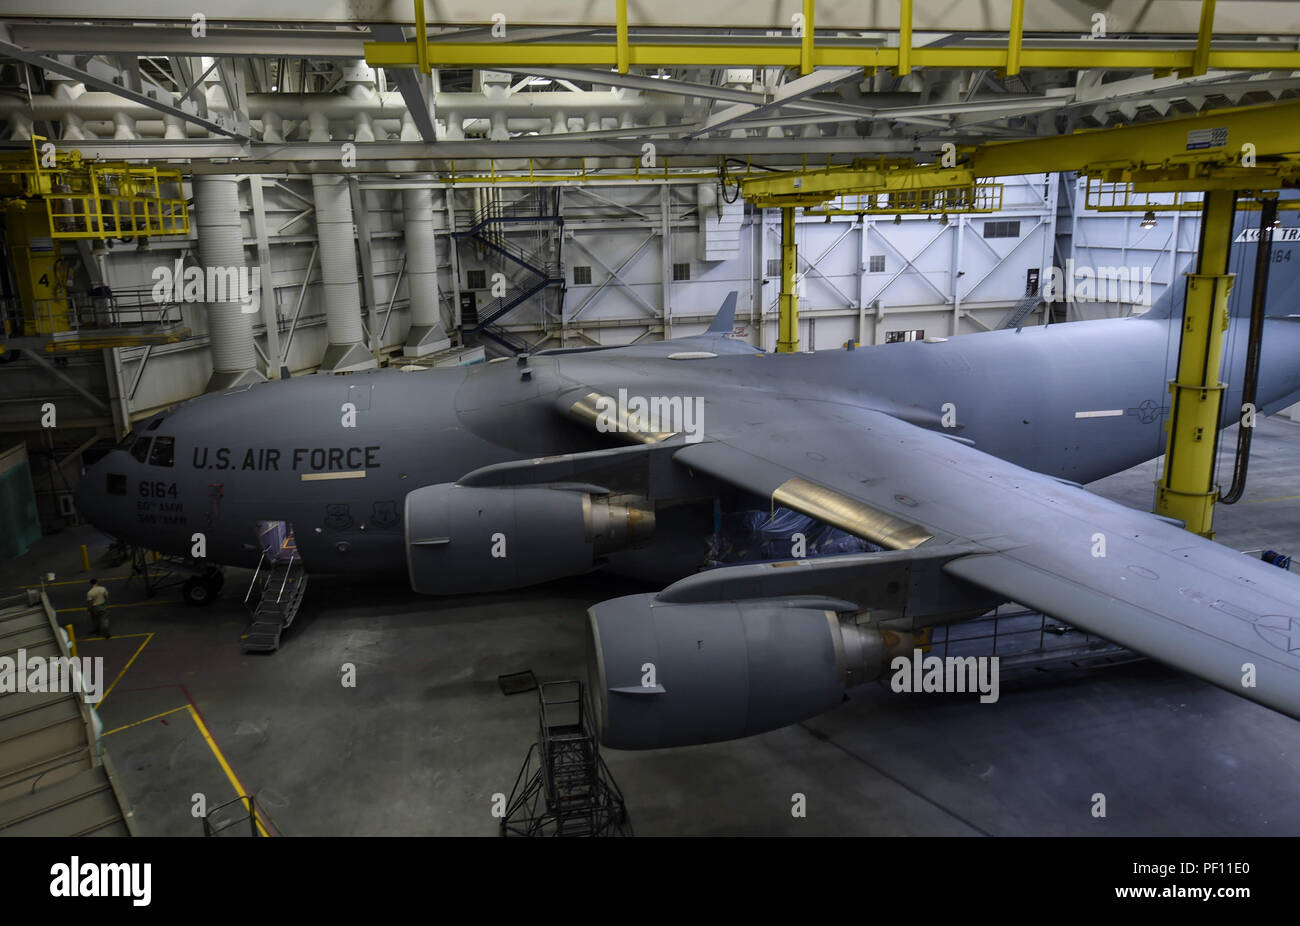 A C-17 Globemaster III from Travis Air Force Base, Calif., sits in a paint barn hangar for paint touch-ups Aug. 6, 2018, at Joint Base Lewis-McChord, Wash. California laws prevent Travis Airmen from spray-painting their C-17s, so they brought it to McChord where it is allowed. (U.S. Air Force photo by Senior Airman Tryphena Mayhugh) Stock Photo